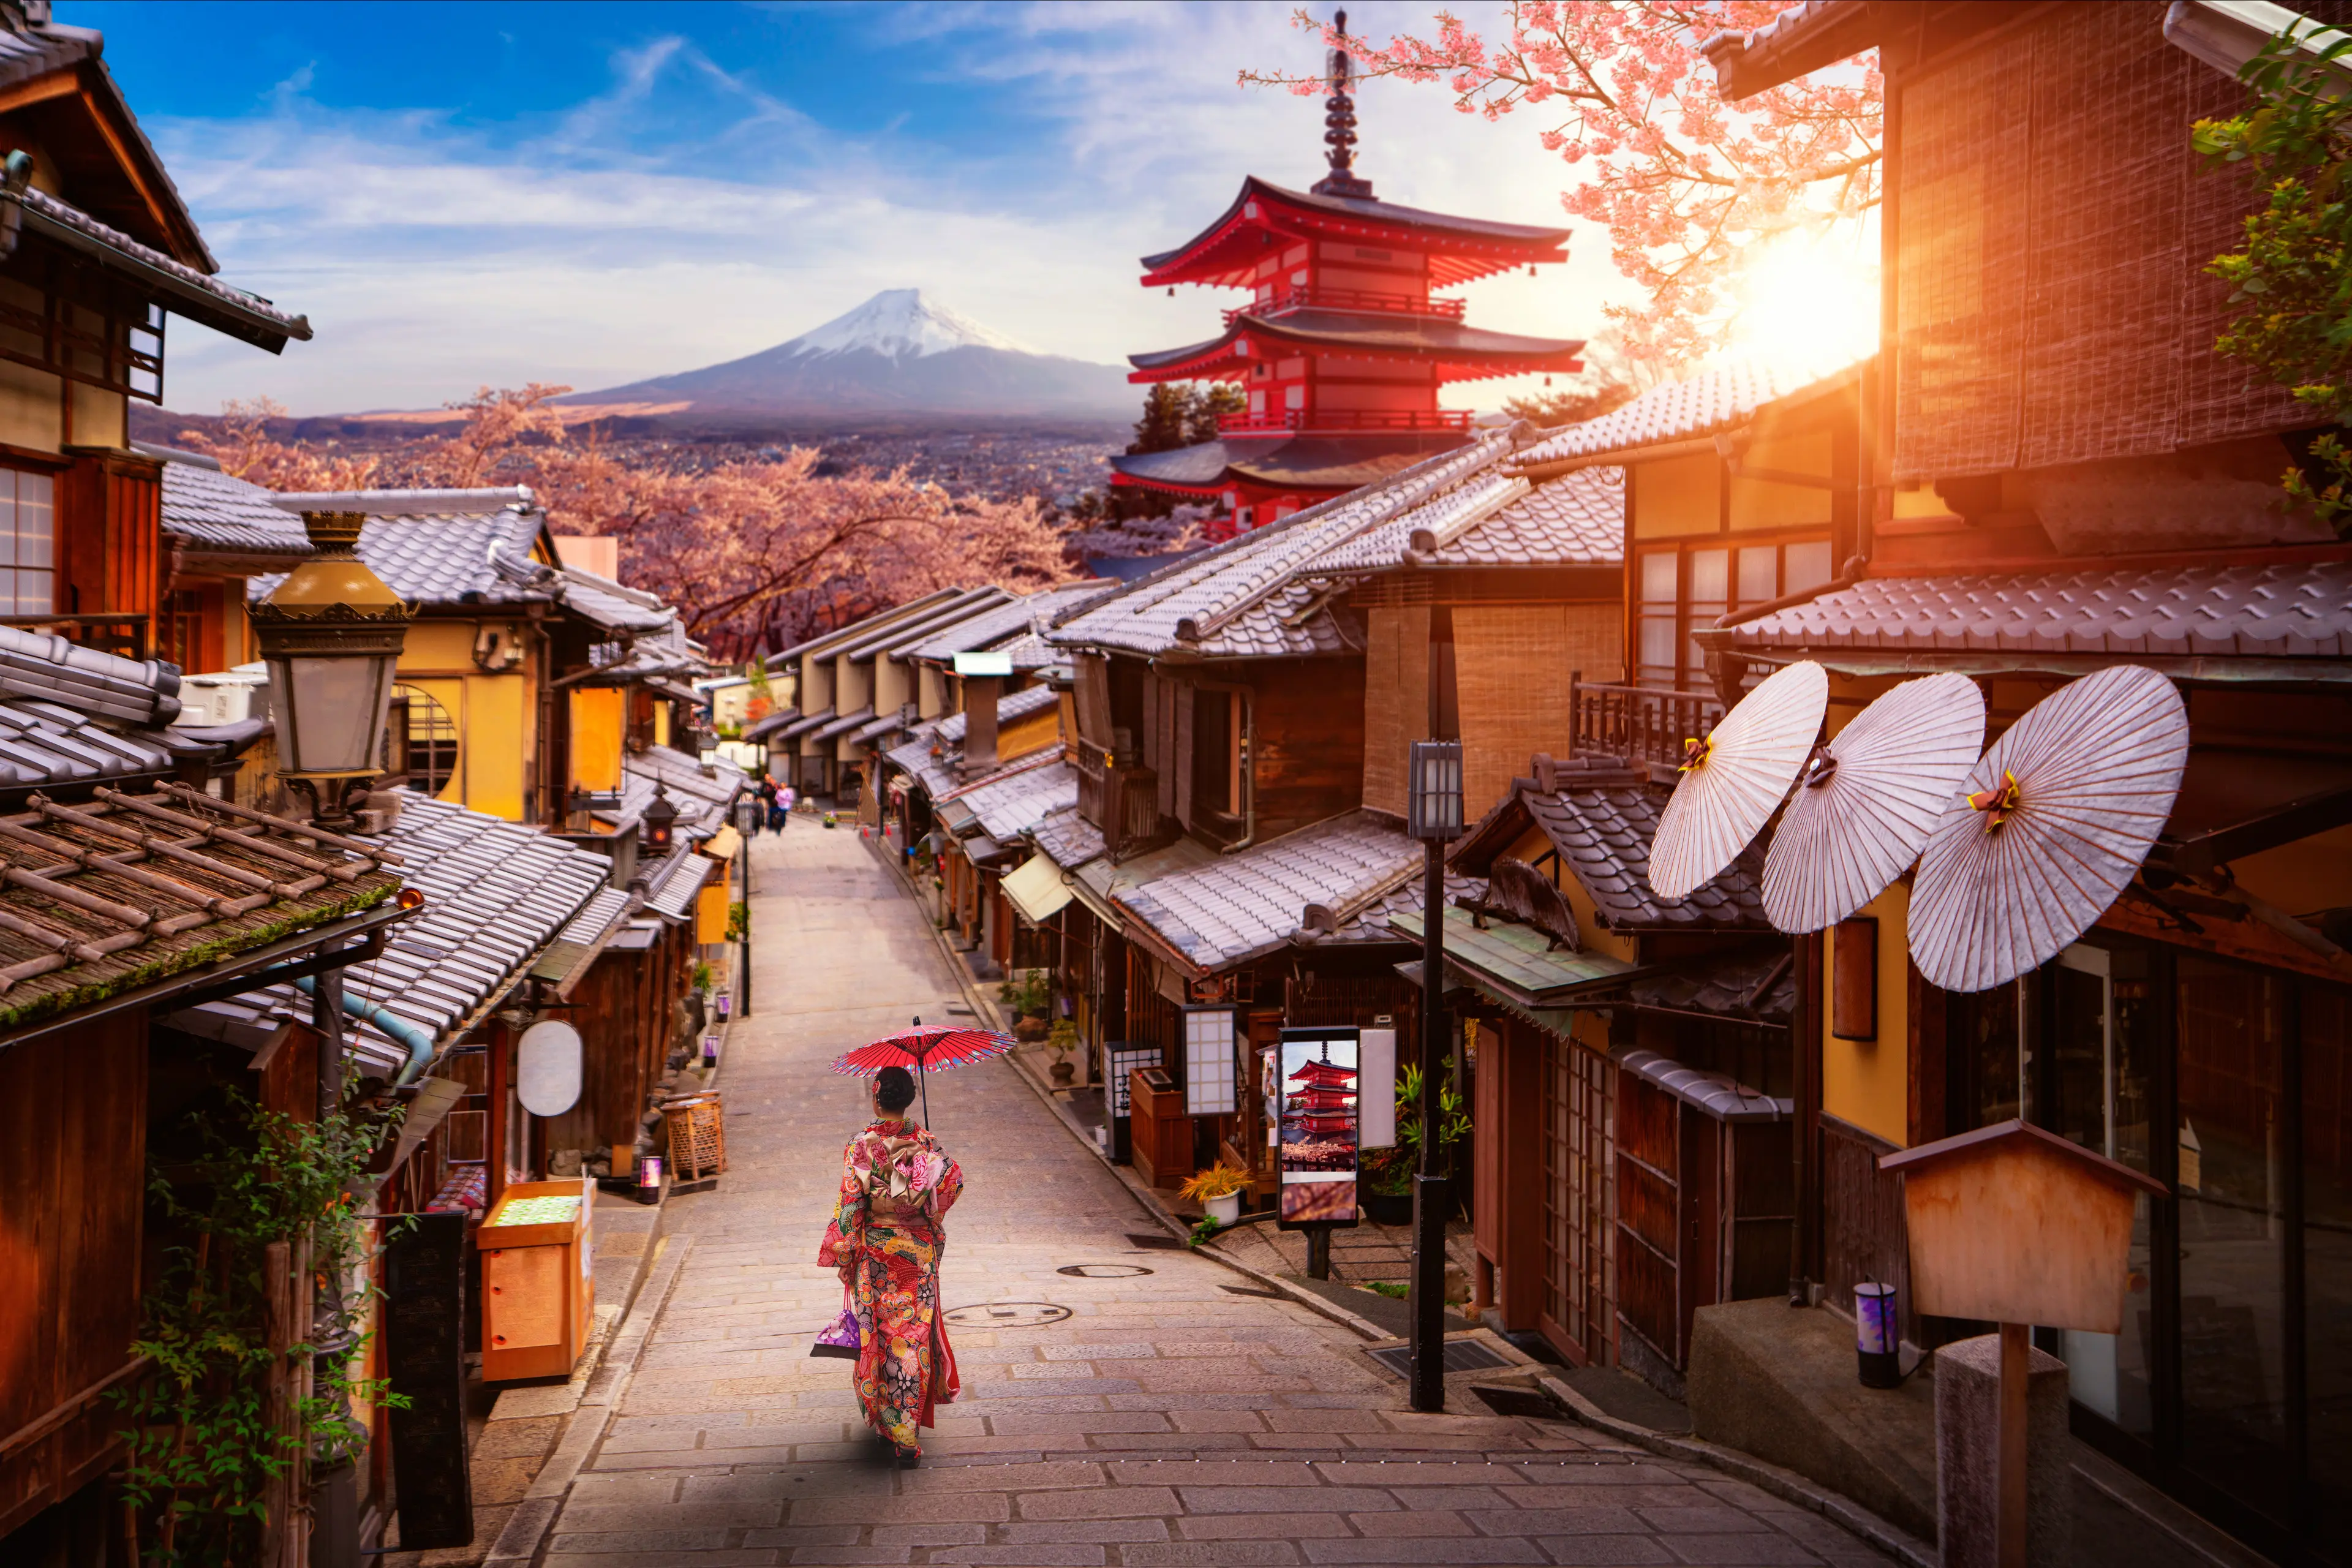 2-Day Solo Food, Wine & Adventure Experience in Kyoto for Locals